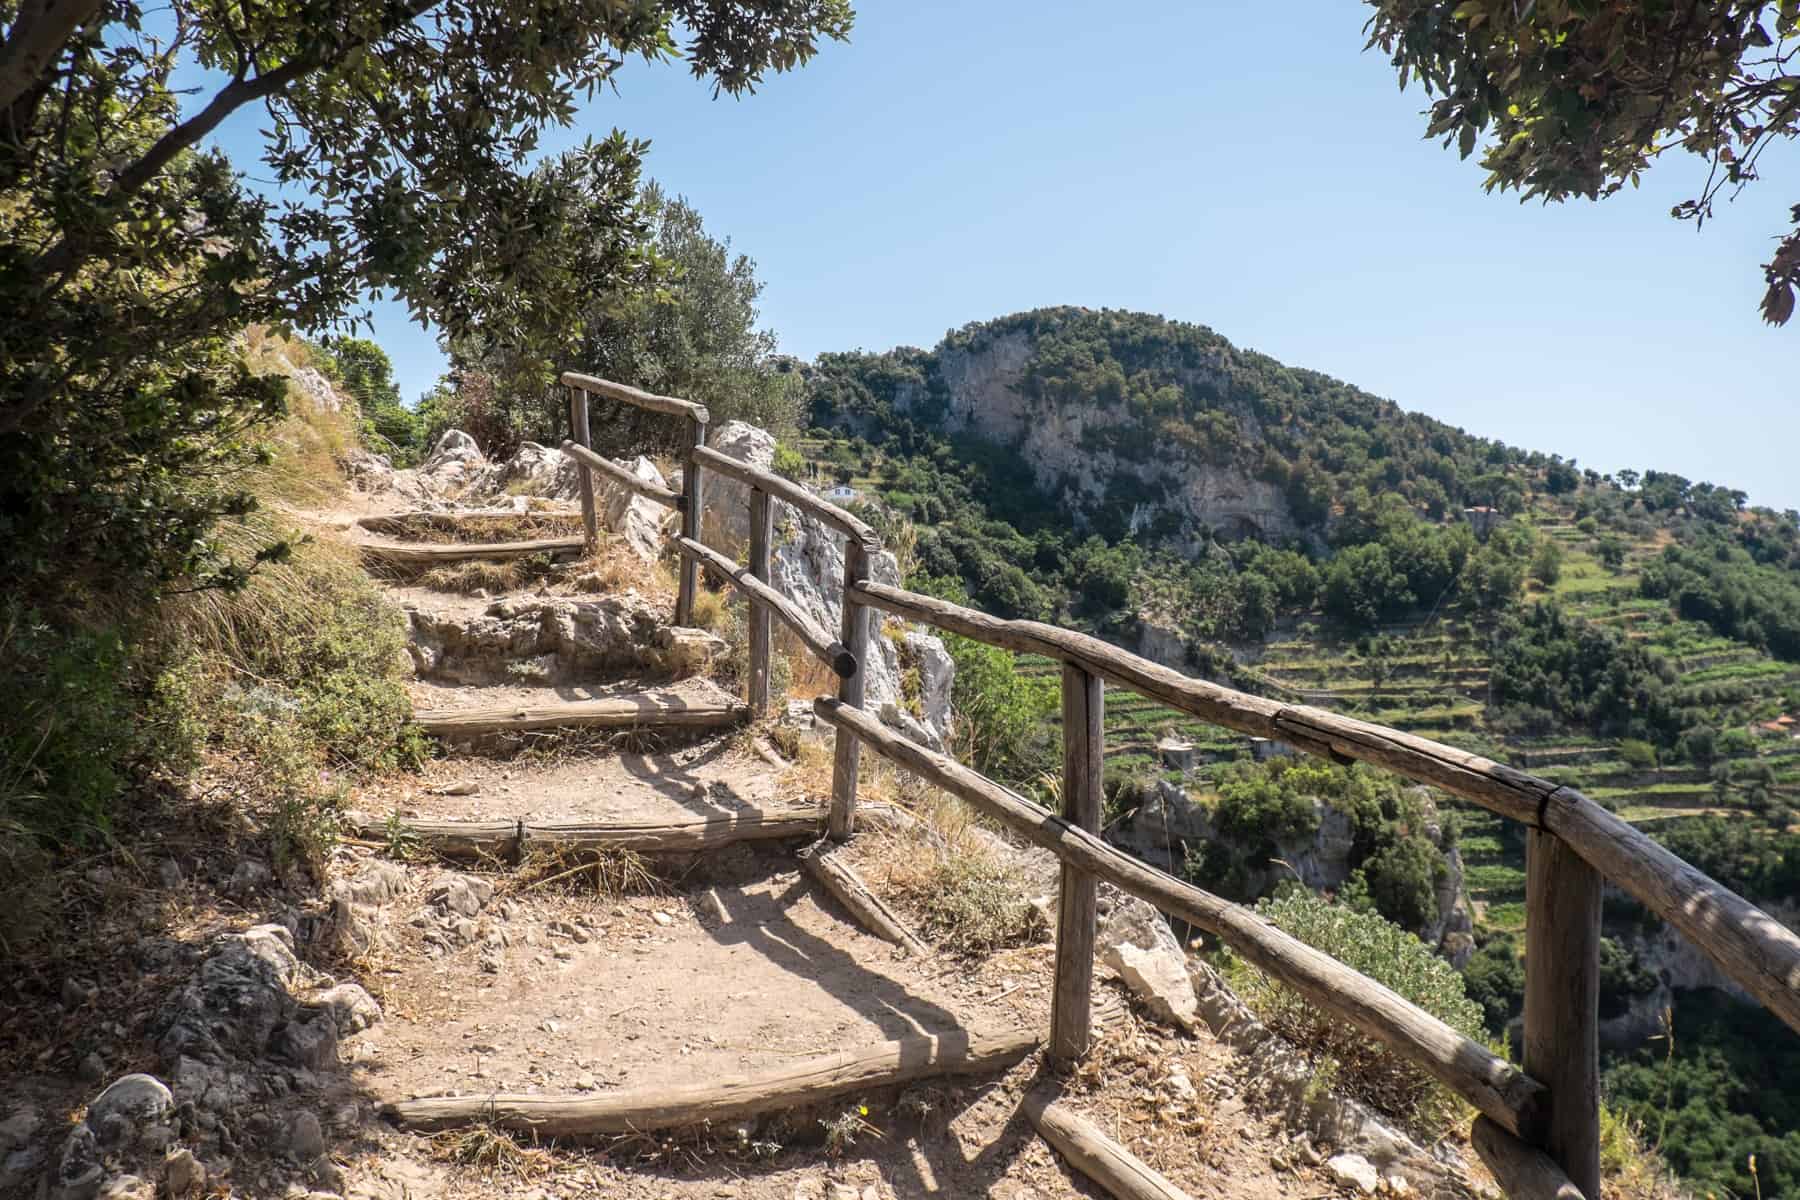 Manmade steps with wooden trims and handrails overlooking mountainous forest terraces on the Sentiero Degli Dei trail. 